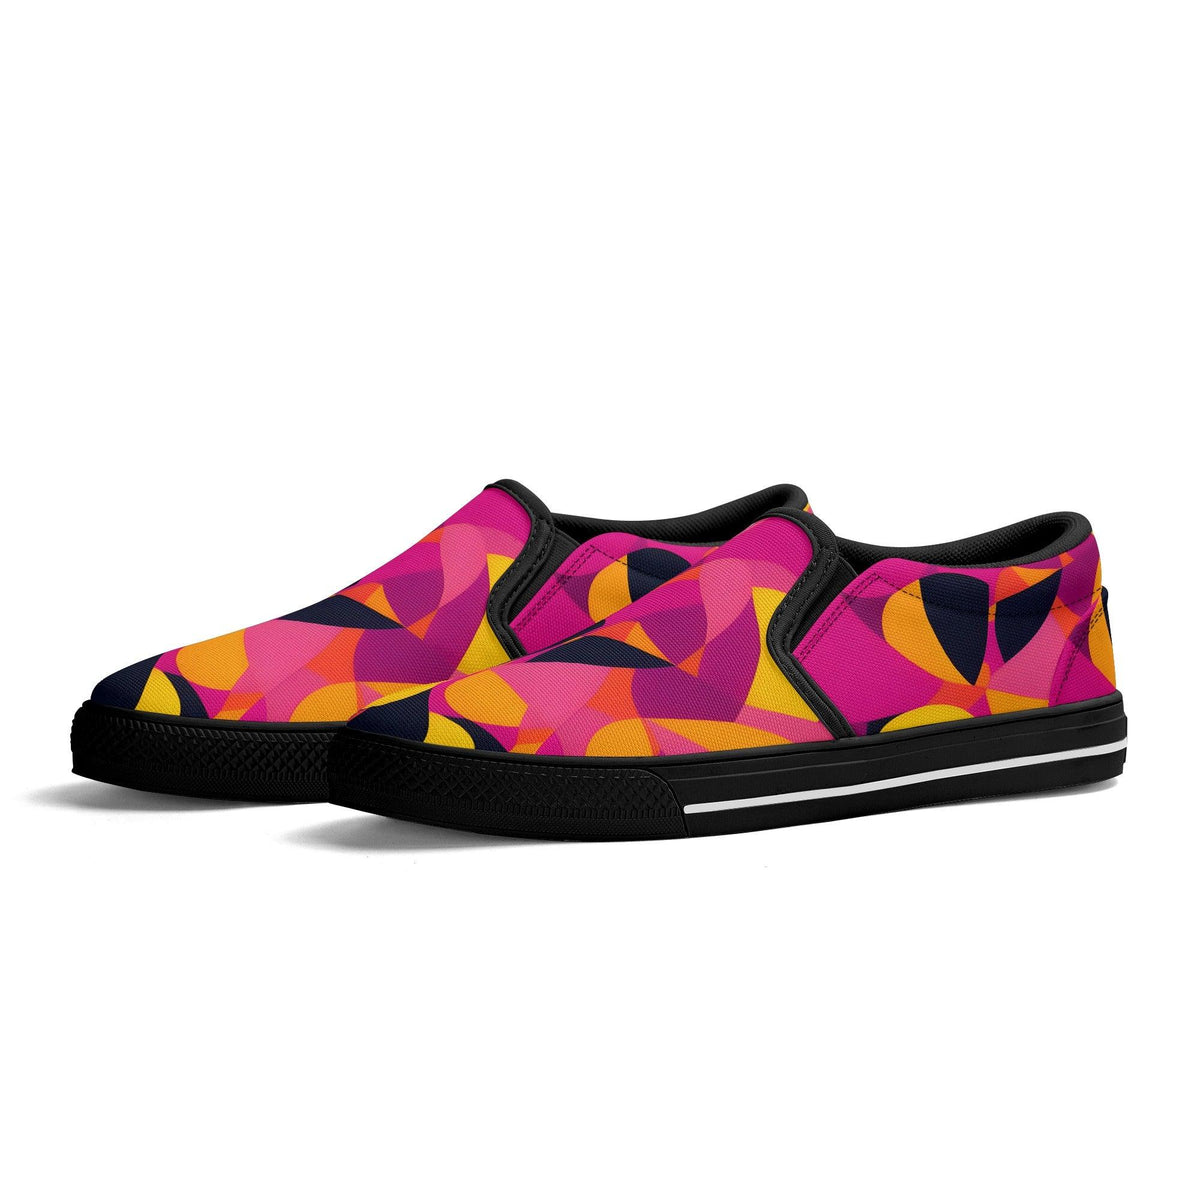 Airline Series - Women's Canvas Slip On Skater Shoes - Abstract Multicolor Black Pink Orange Yellow Retro Funky Mod Bold Vibrant Streetwear Casual Statement - Blissfully Brand - Munich Psychedelic 70's pop art Geometric